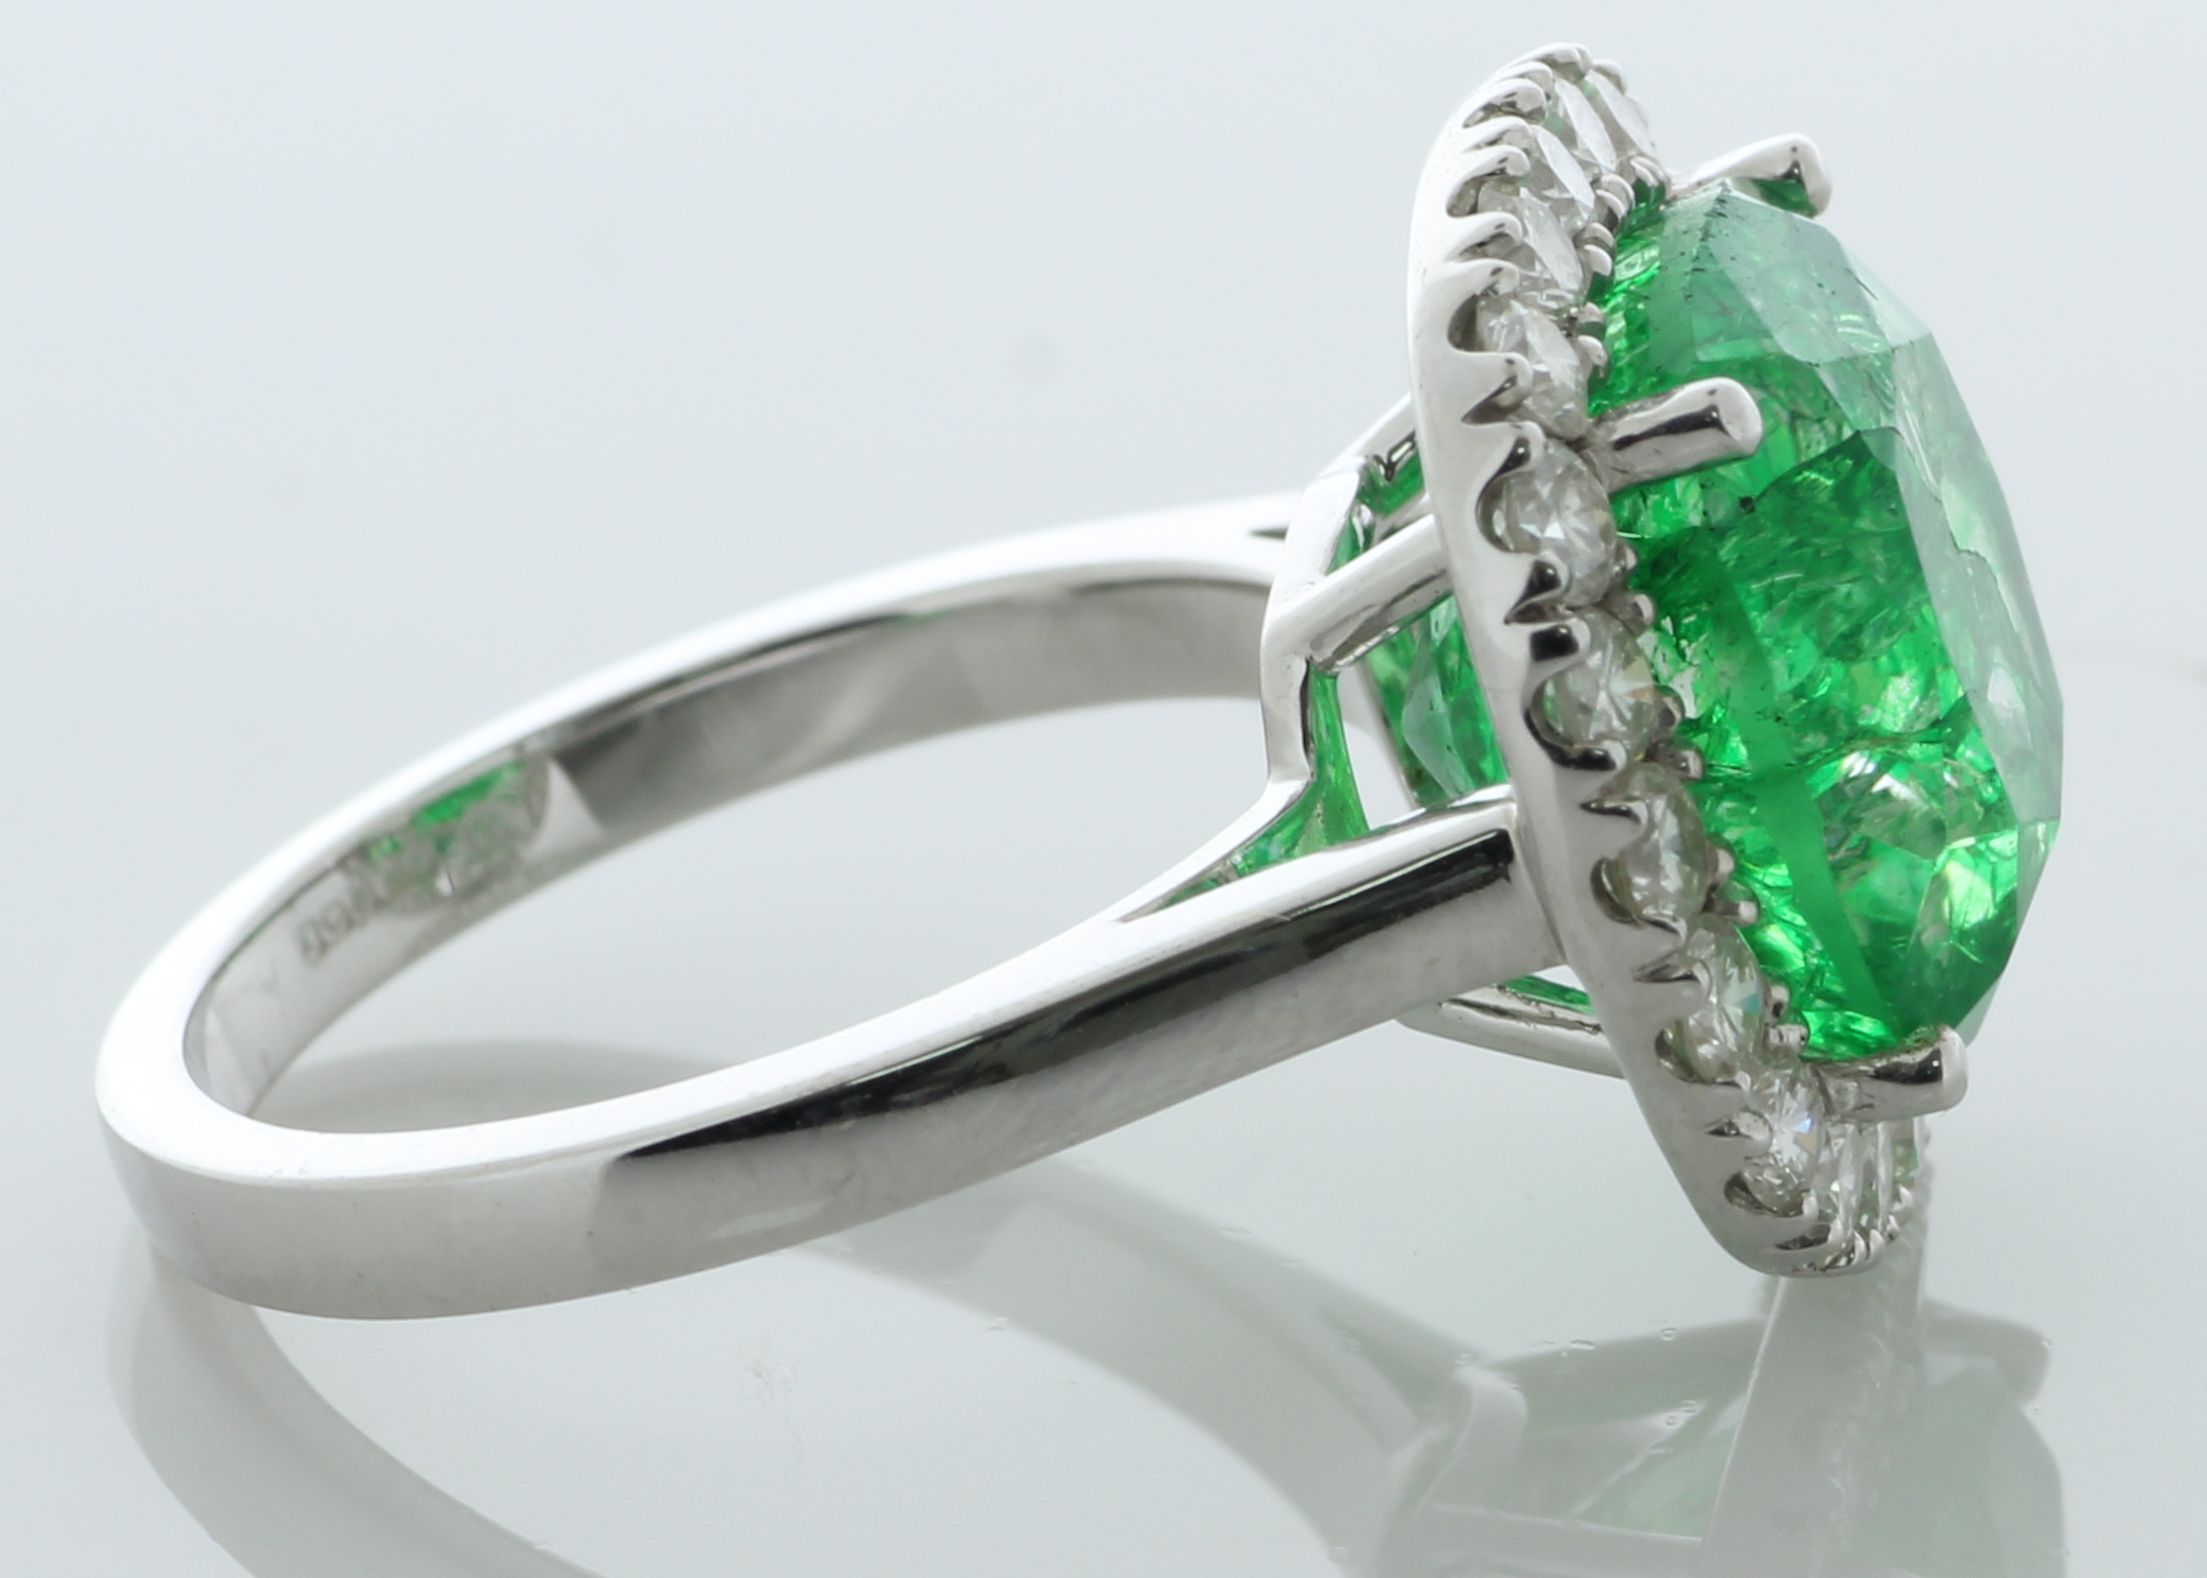 18ct White Gold cushion Emerald and Diamond Cluster Ring (7.99) 1.07 Carats - Image 5 of 5